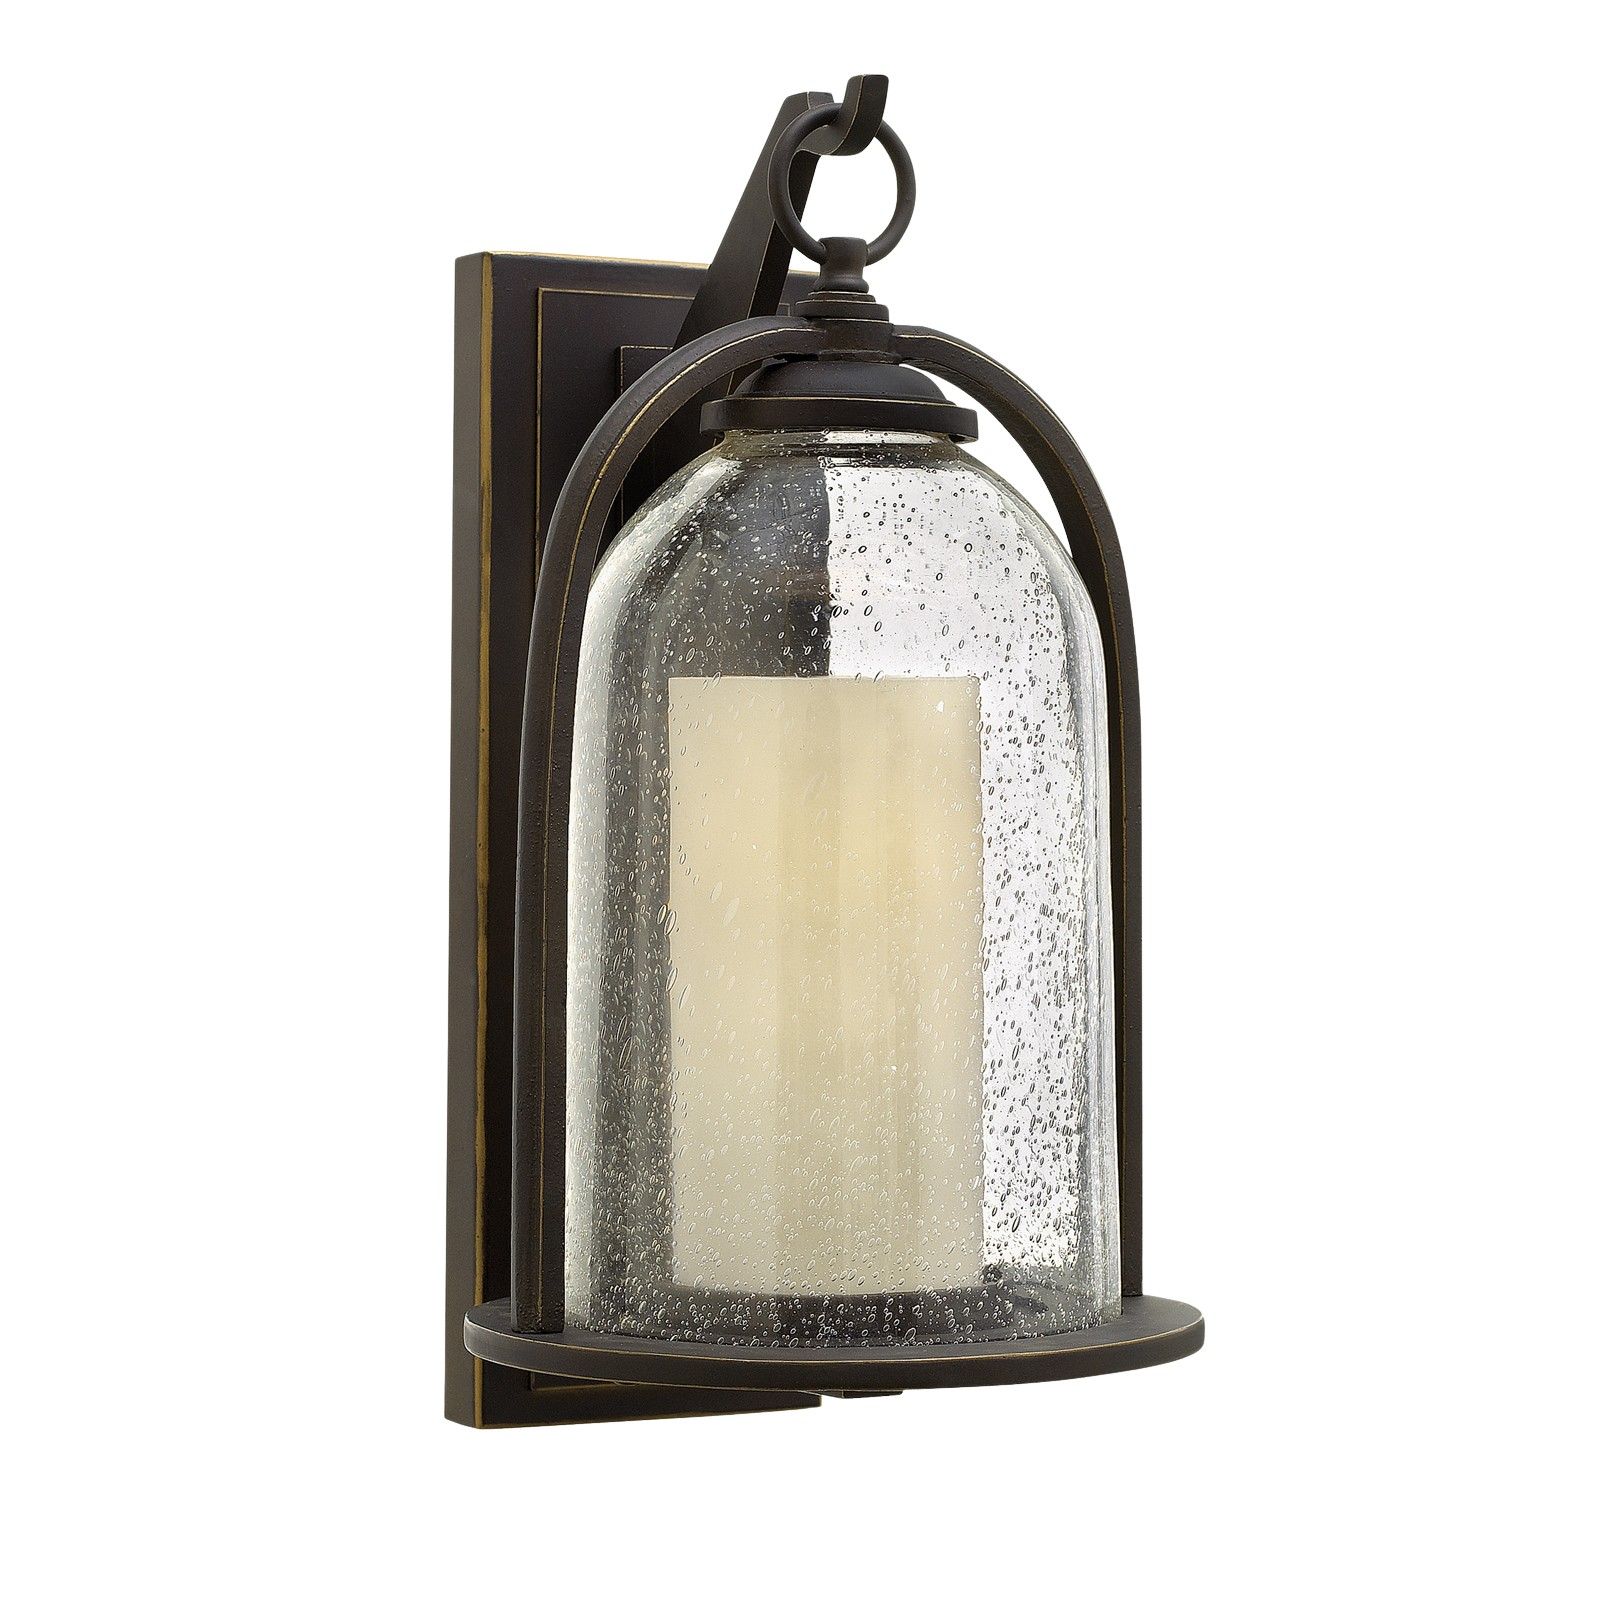 Quince medium wall lantern in oil rubbed bronze